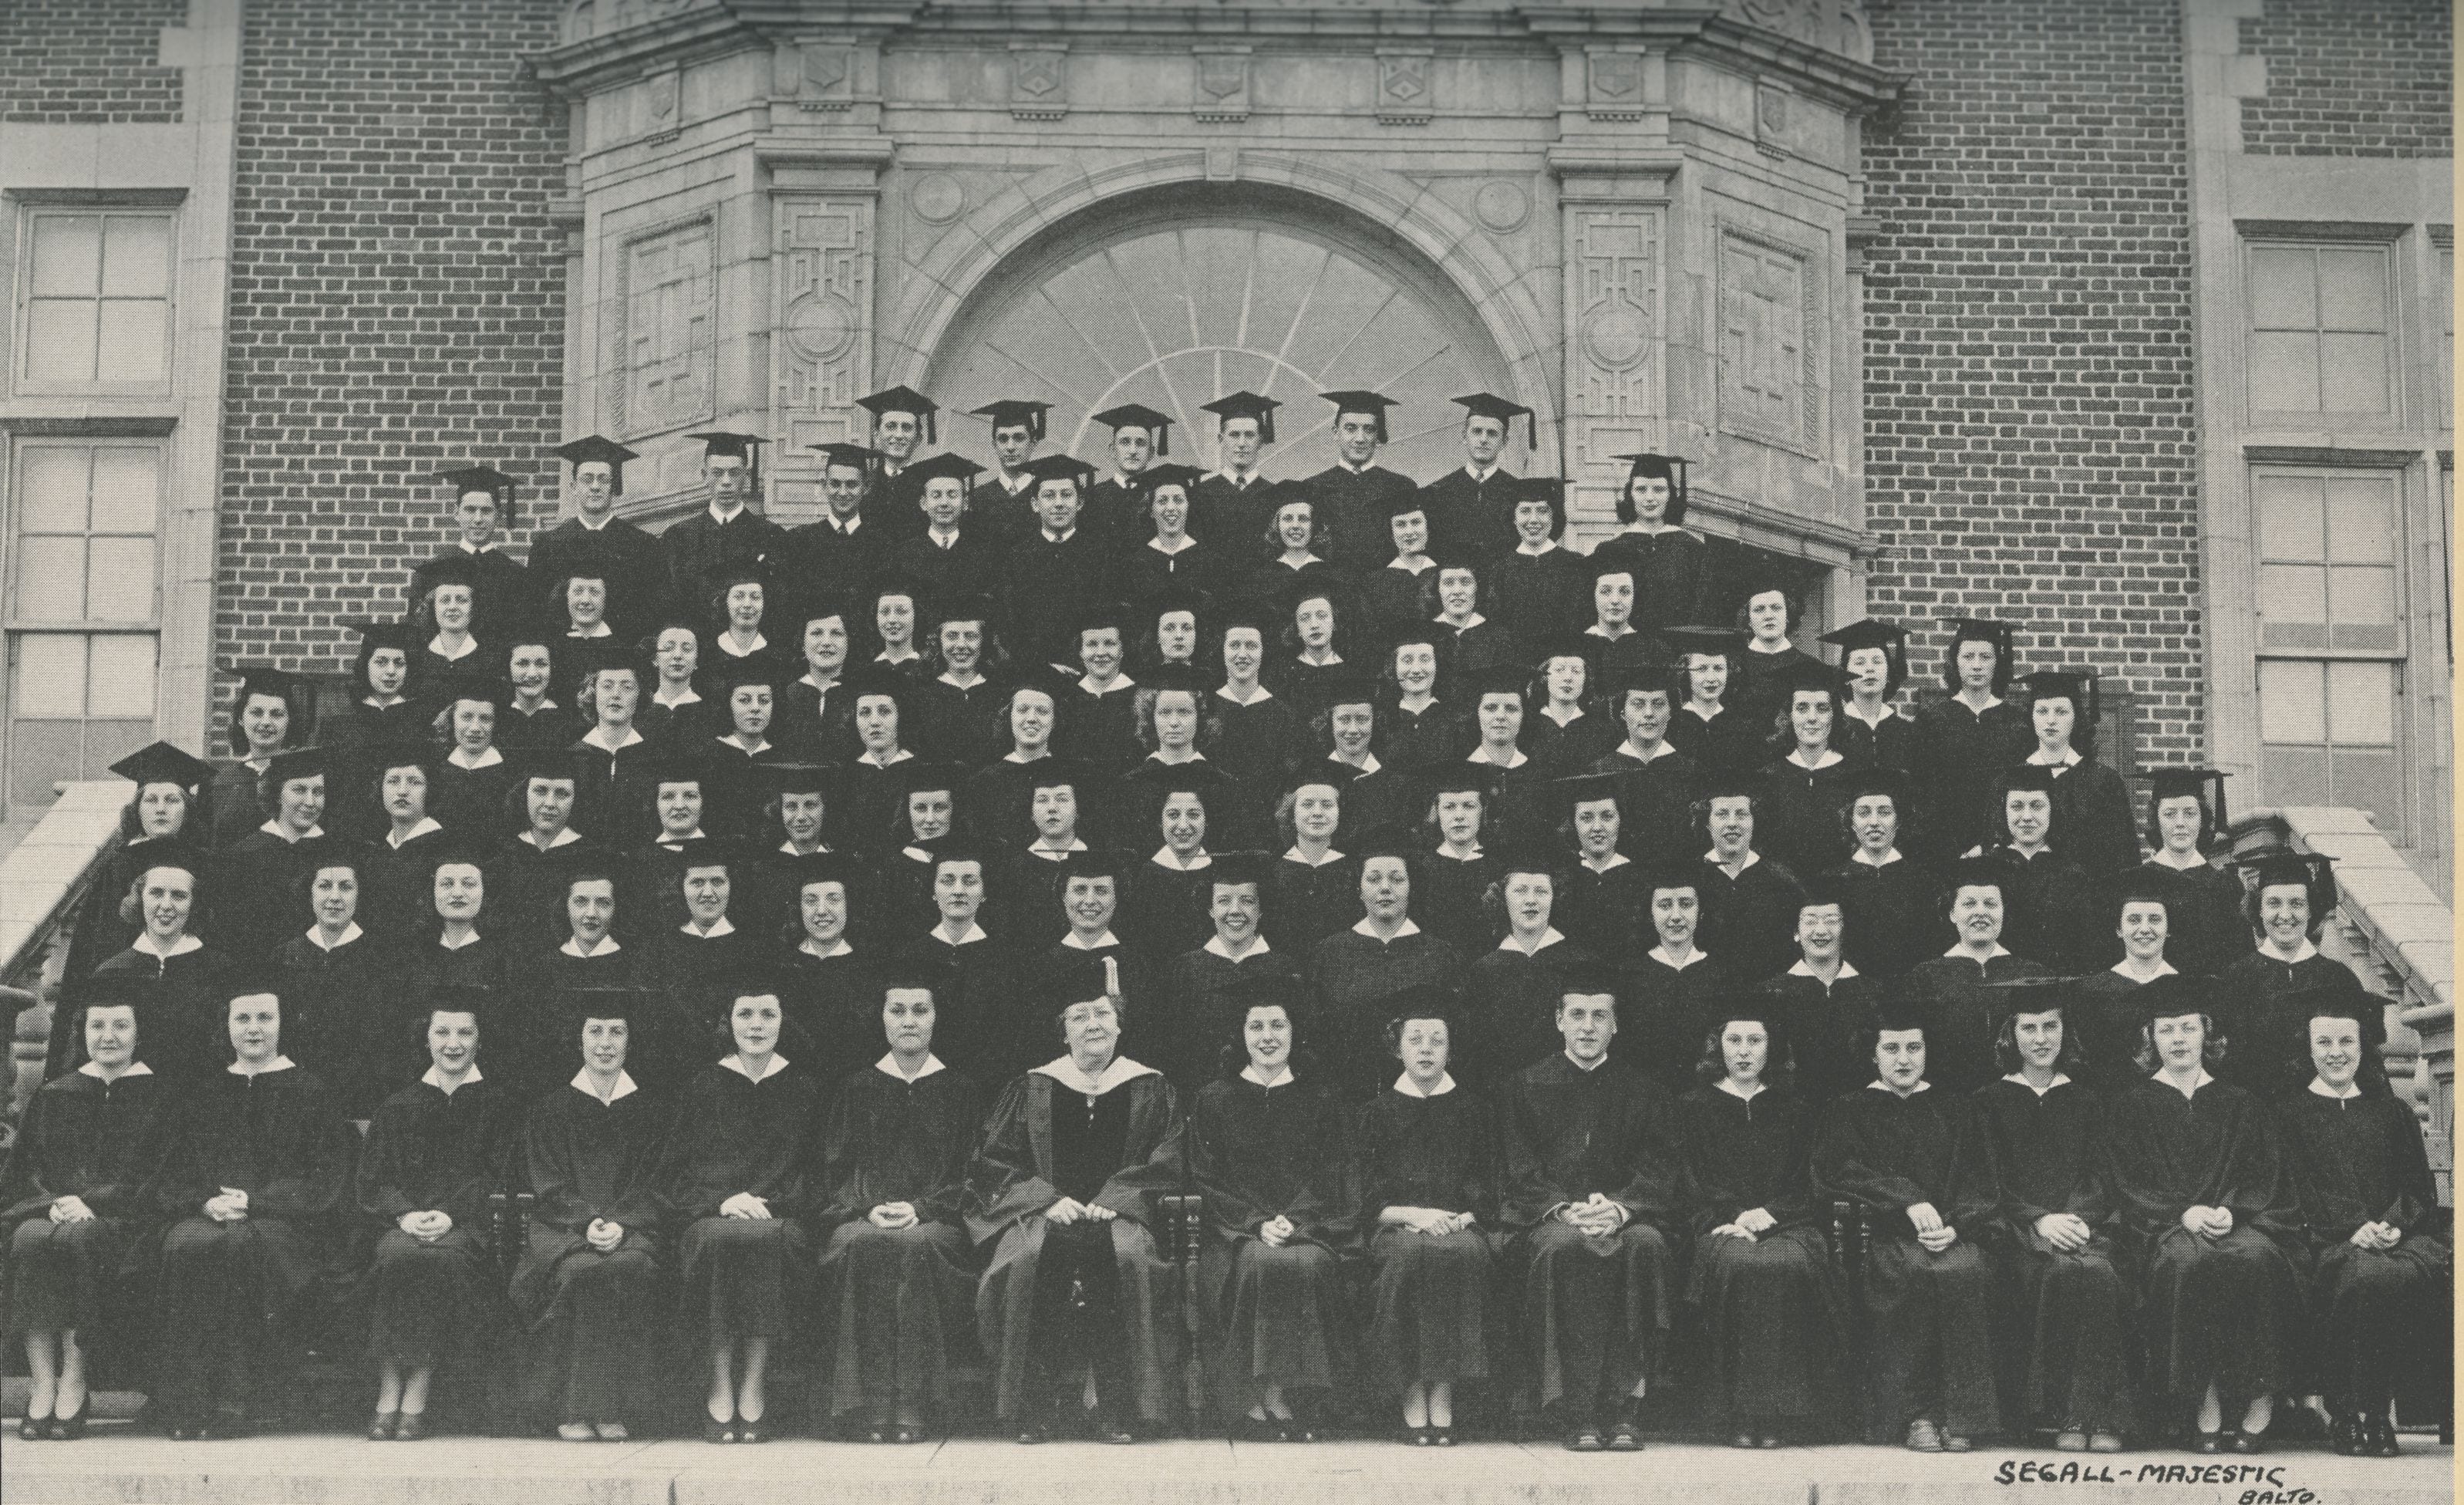 Photo of graduates in caps and gowns arranged on steps in front of Stephens Hall. Dr. Wiedefeld is seated in front and center of the photo dressed in academic regalia